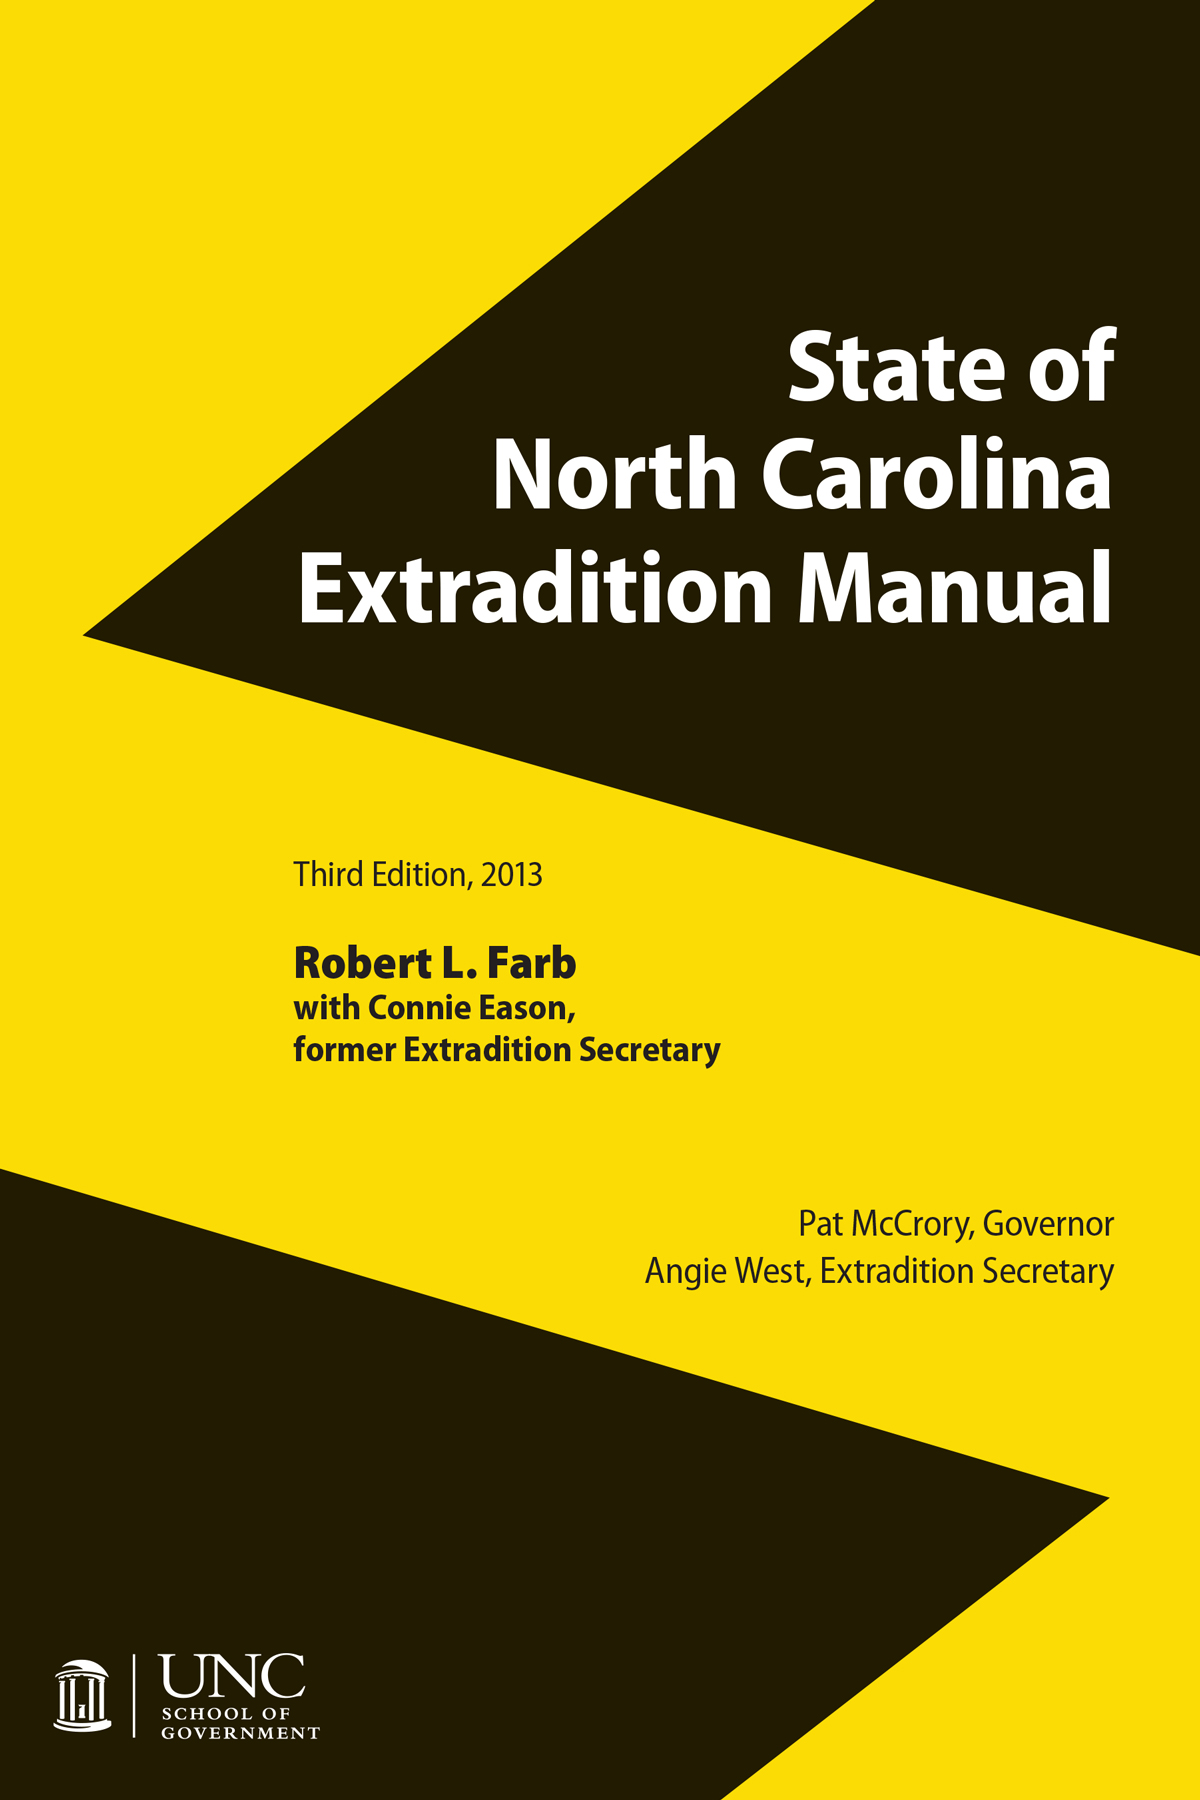 State of North Carolina Extradition Manual, Third Edition, 2013, by Robert L. Farb